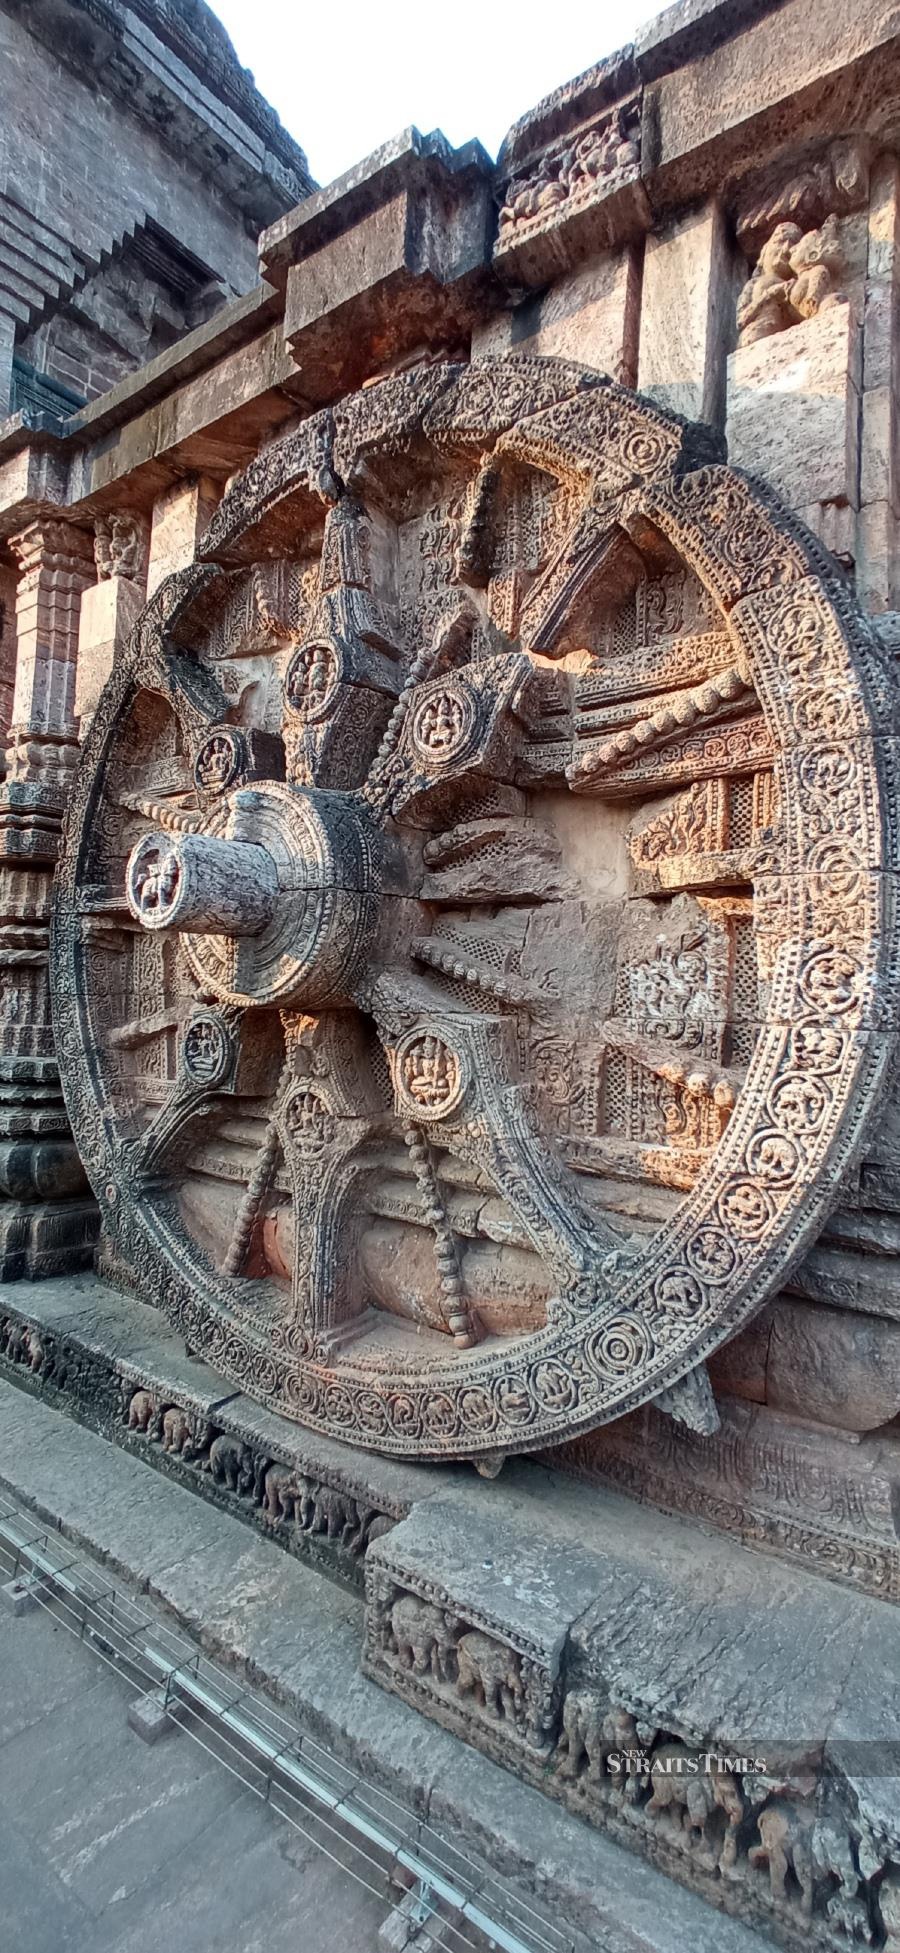  Part of the wheel found at the Konark temple — 12 wheels represent the 12 months in a year.